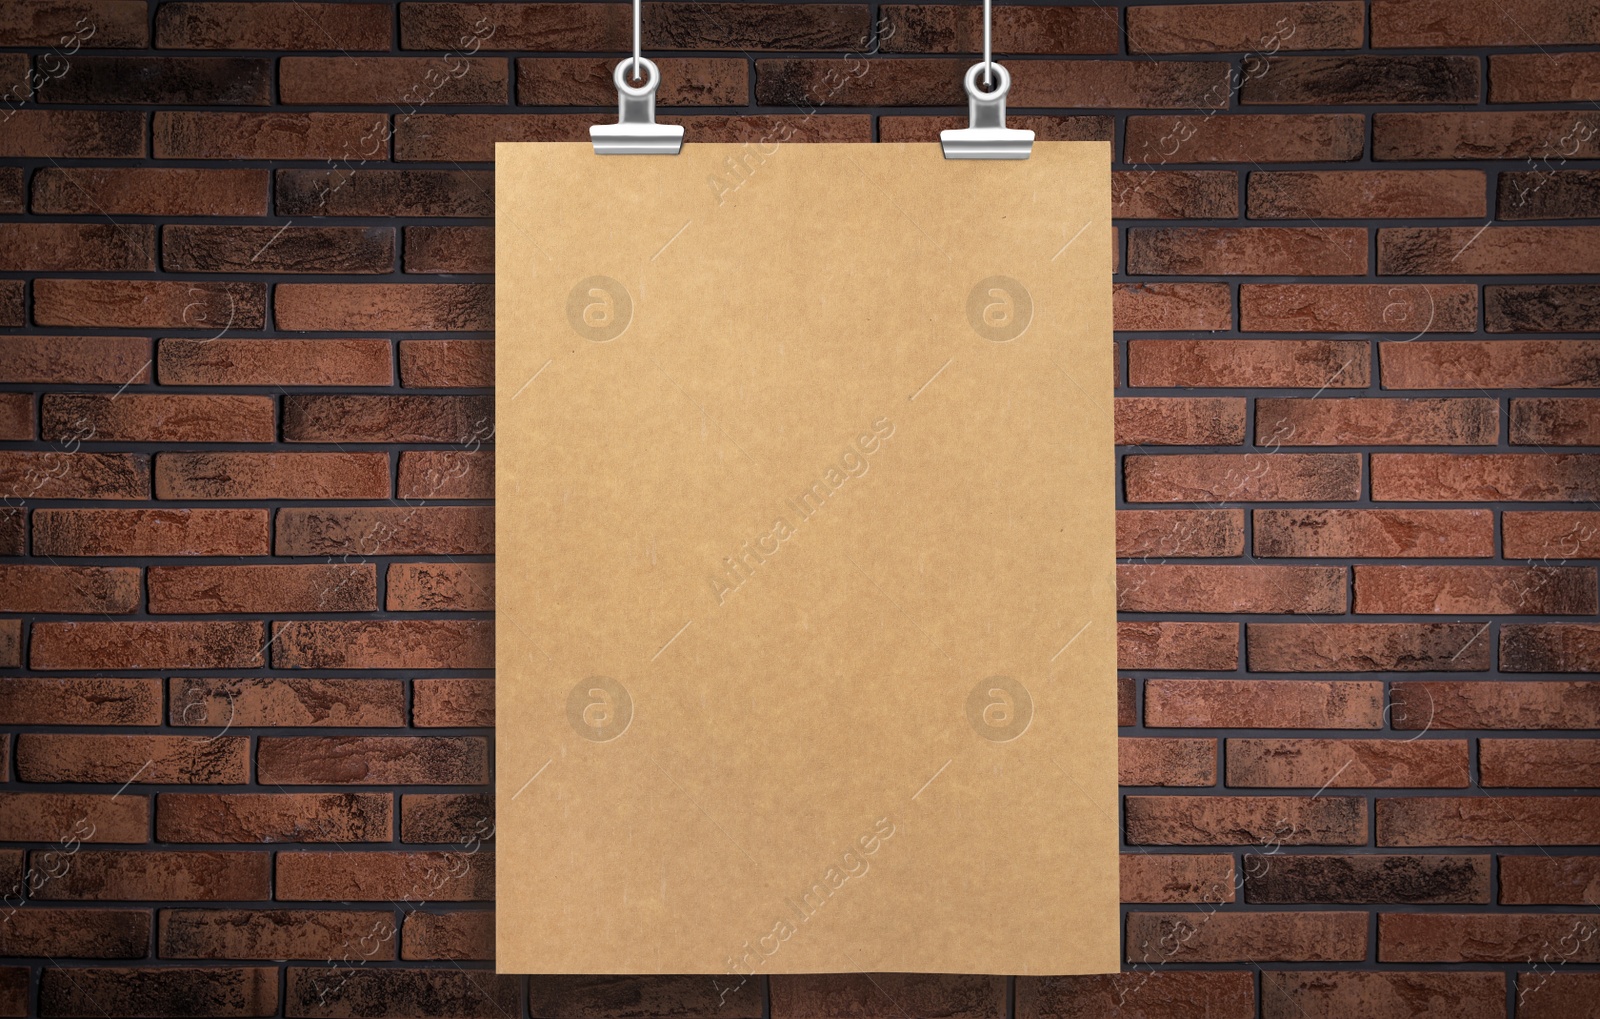 Image of Blank poster hanging near brick wall. Space for design